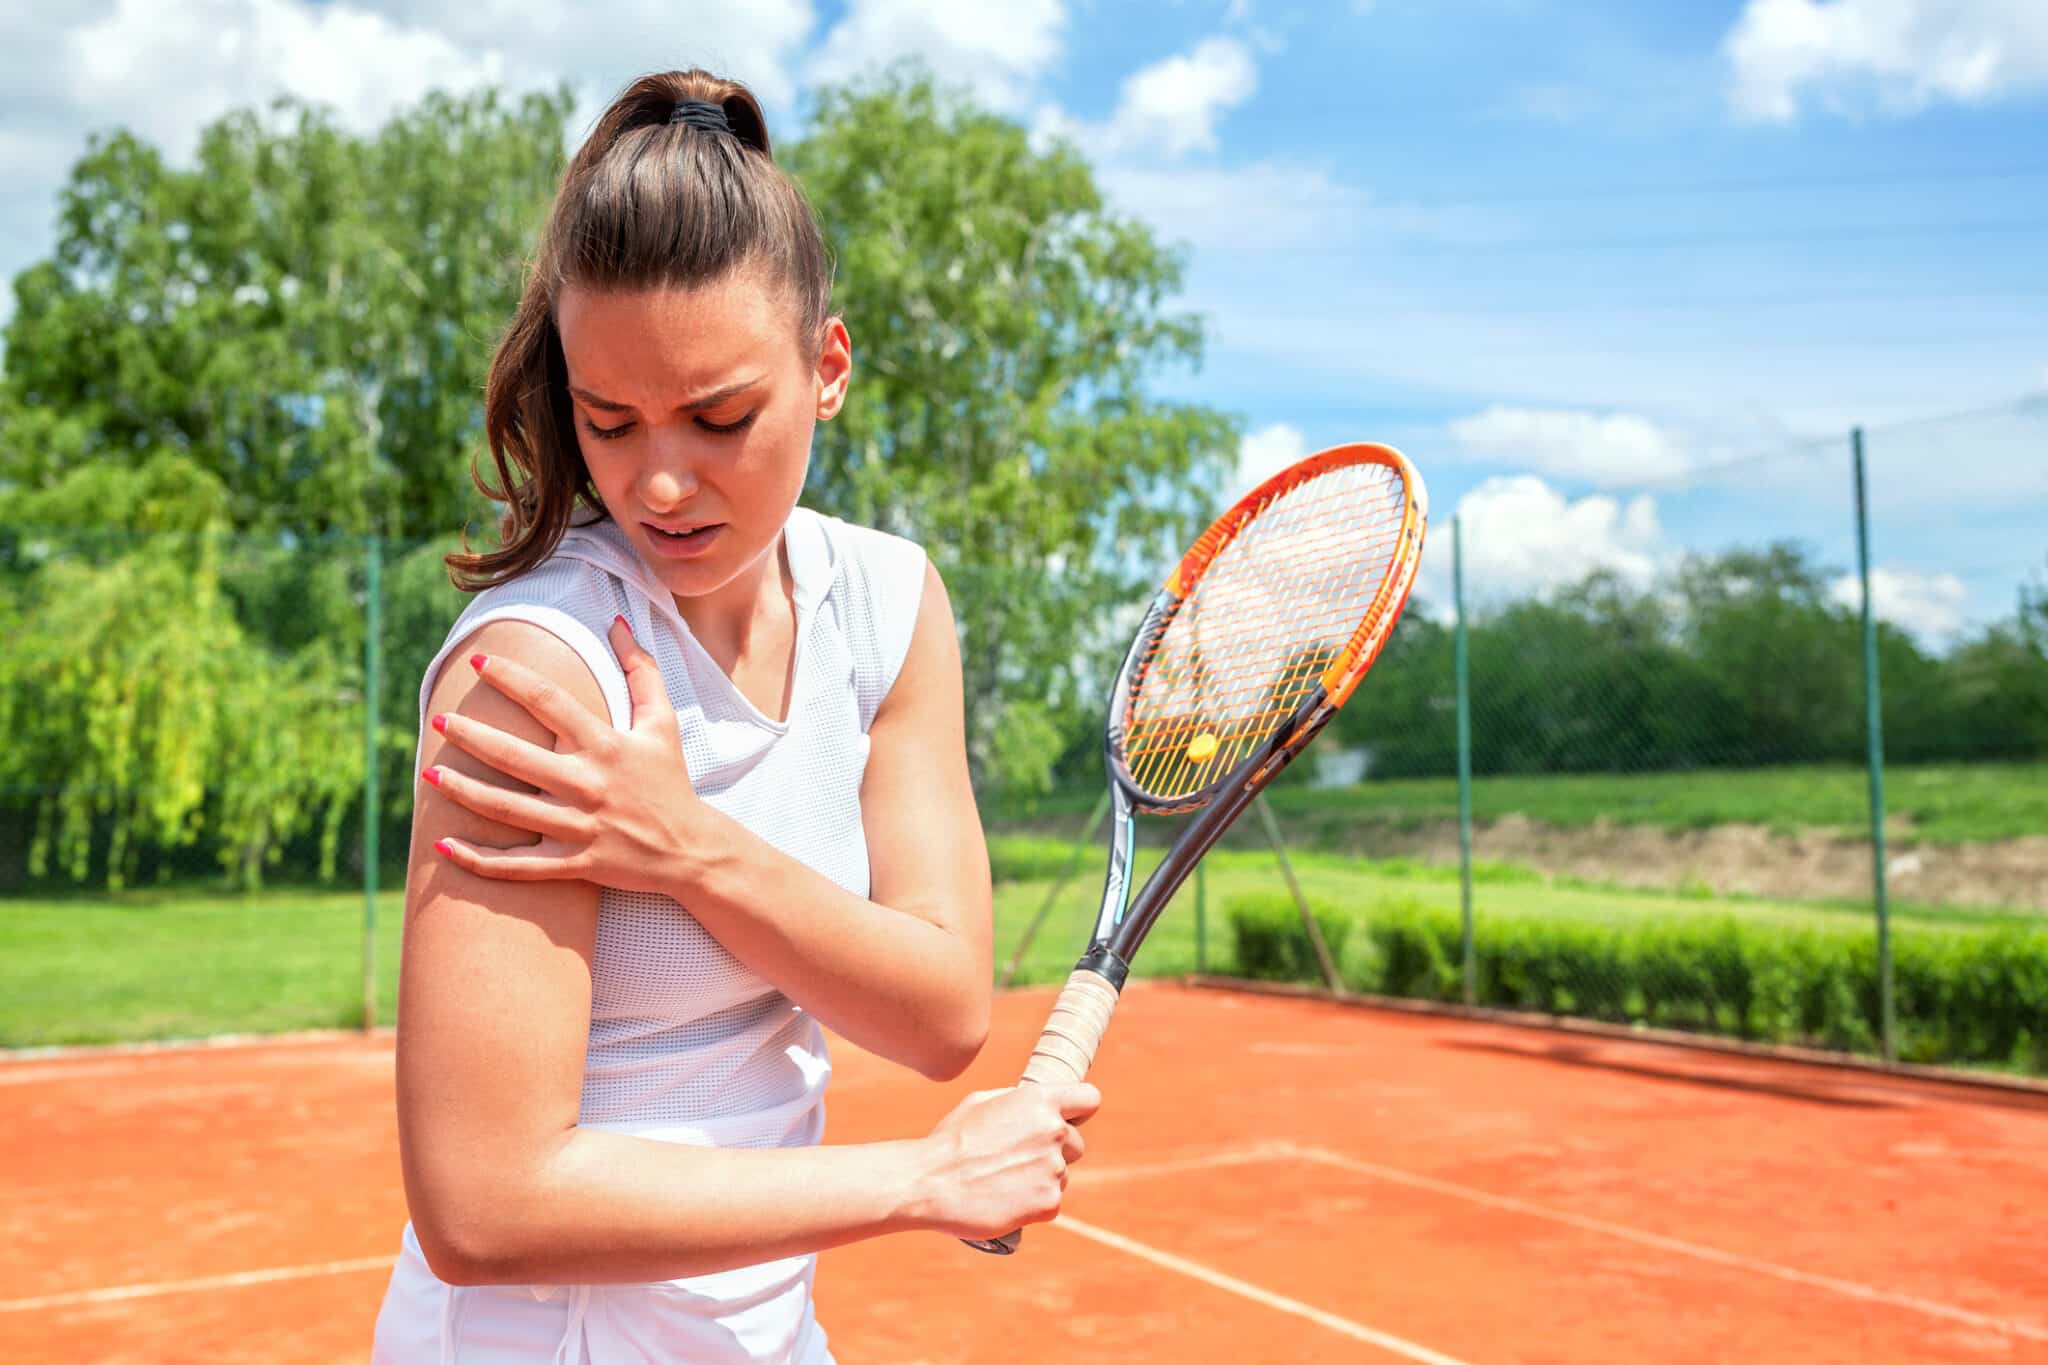 How Do You Know if You Have Shoulder Impingement Syndrome?